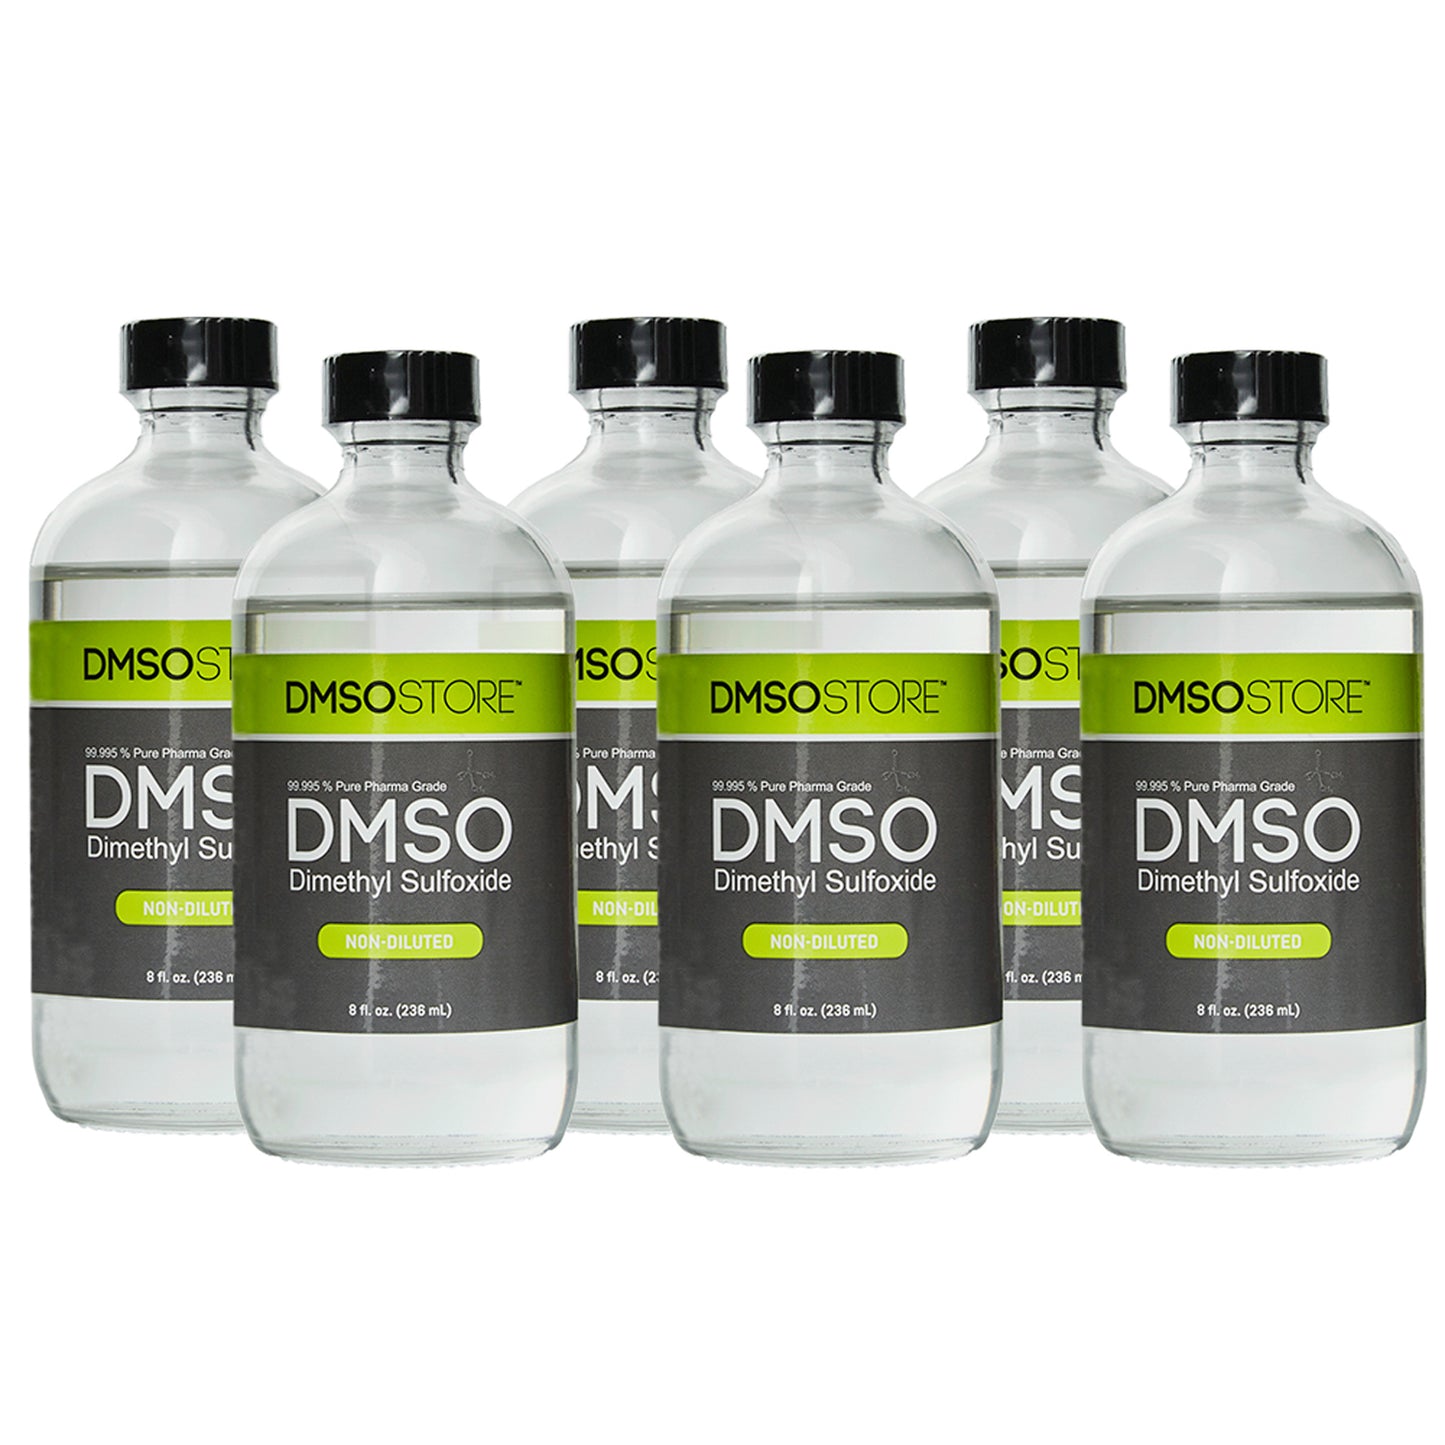 DMSO-liquid-99.995-8oz.-non-diluted-dimethyl-sulfoxide-organic-best-6-pack. 6 8 oz glass bottles with Black twist on cap attached to bottle. Label reads 99.995% Pure pharma Grade DMSO (Dimethyl Sulfoxide) 8oz.